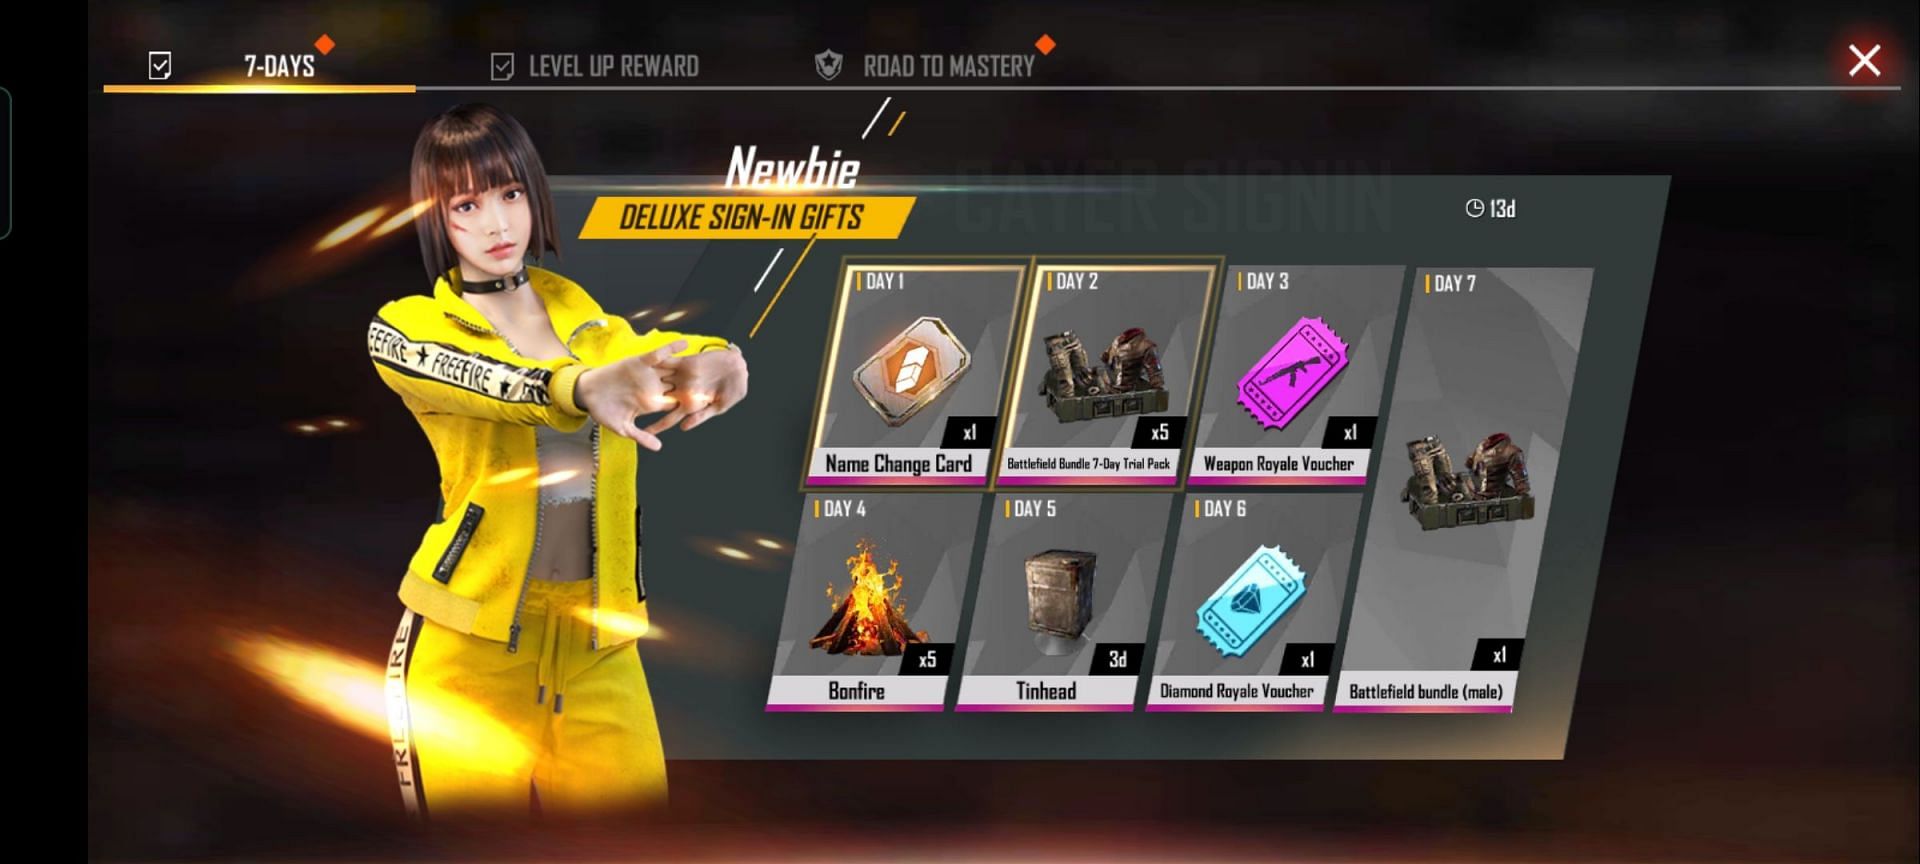 Name Card Card is given as part of the newbie login rewards (Image via Free Fire)